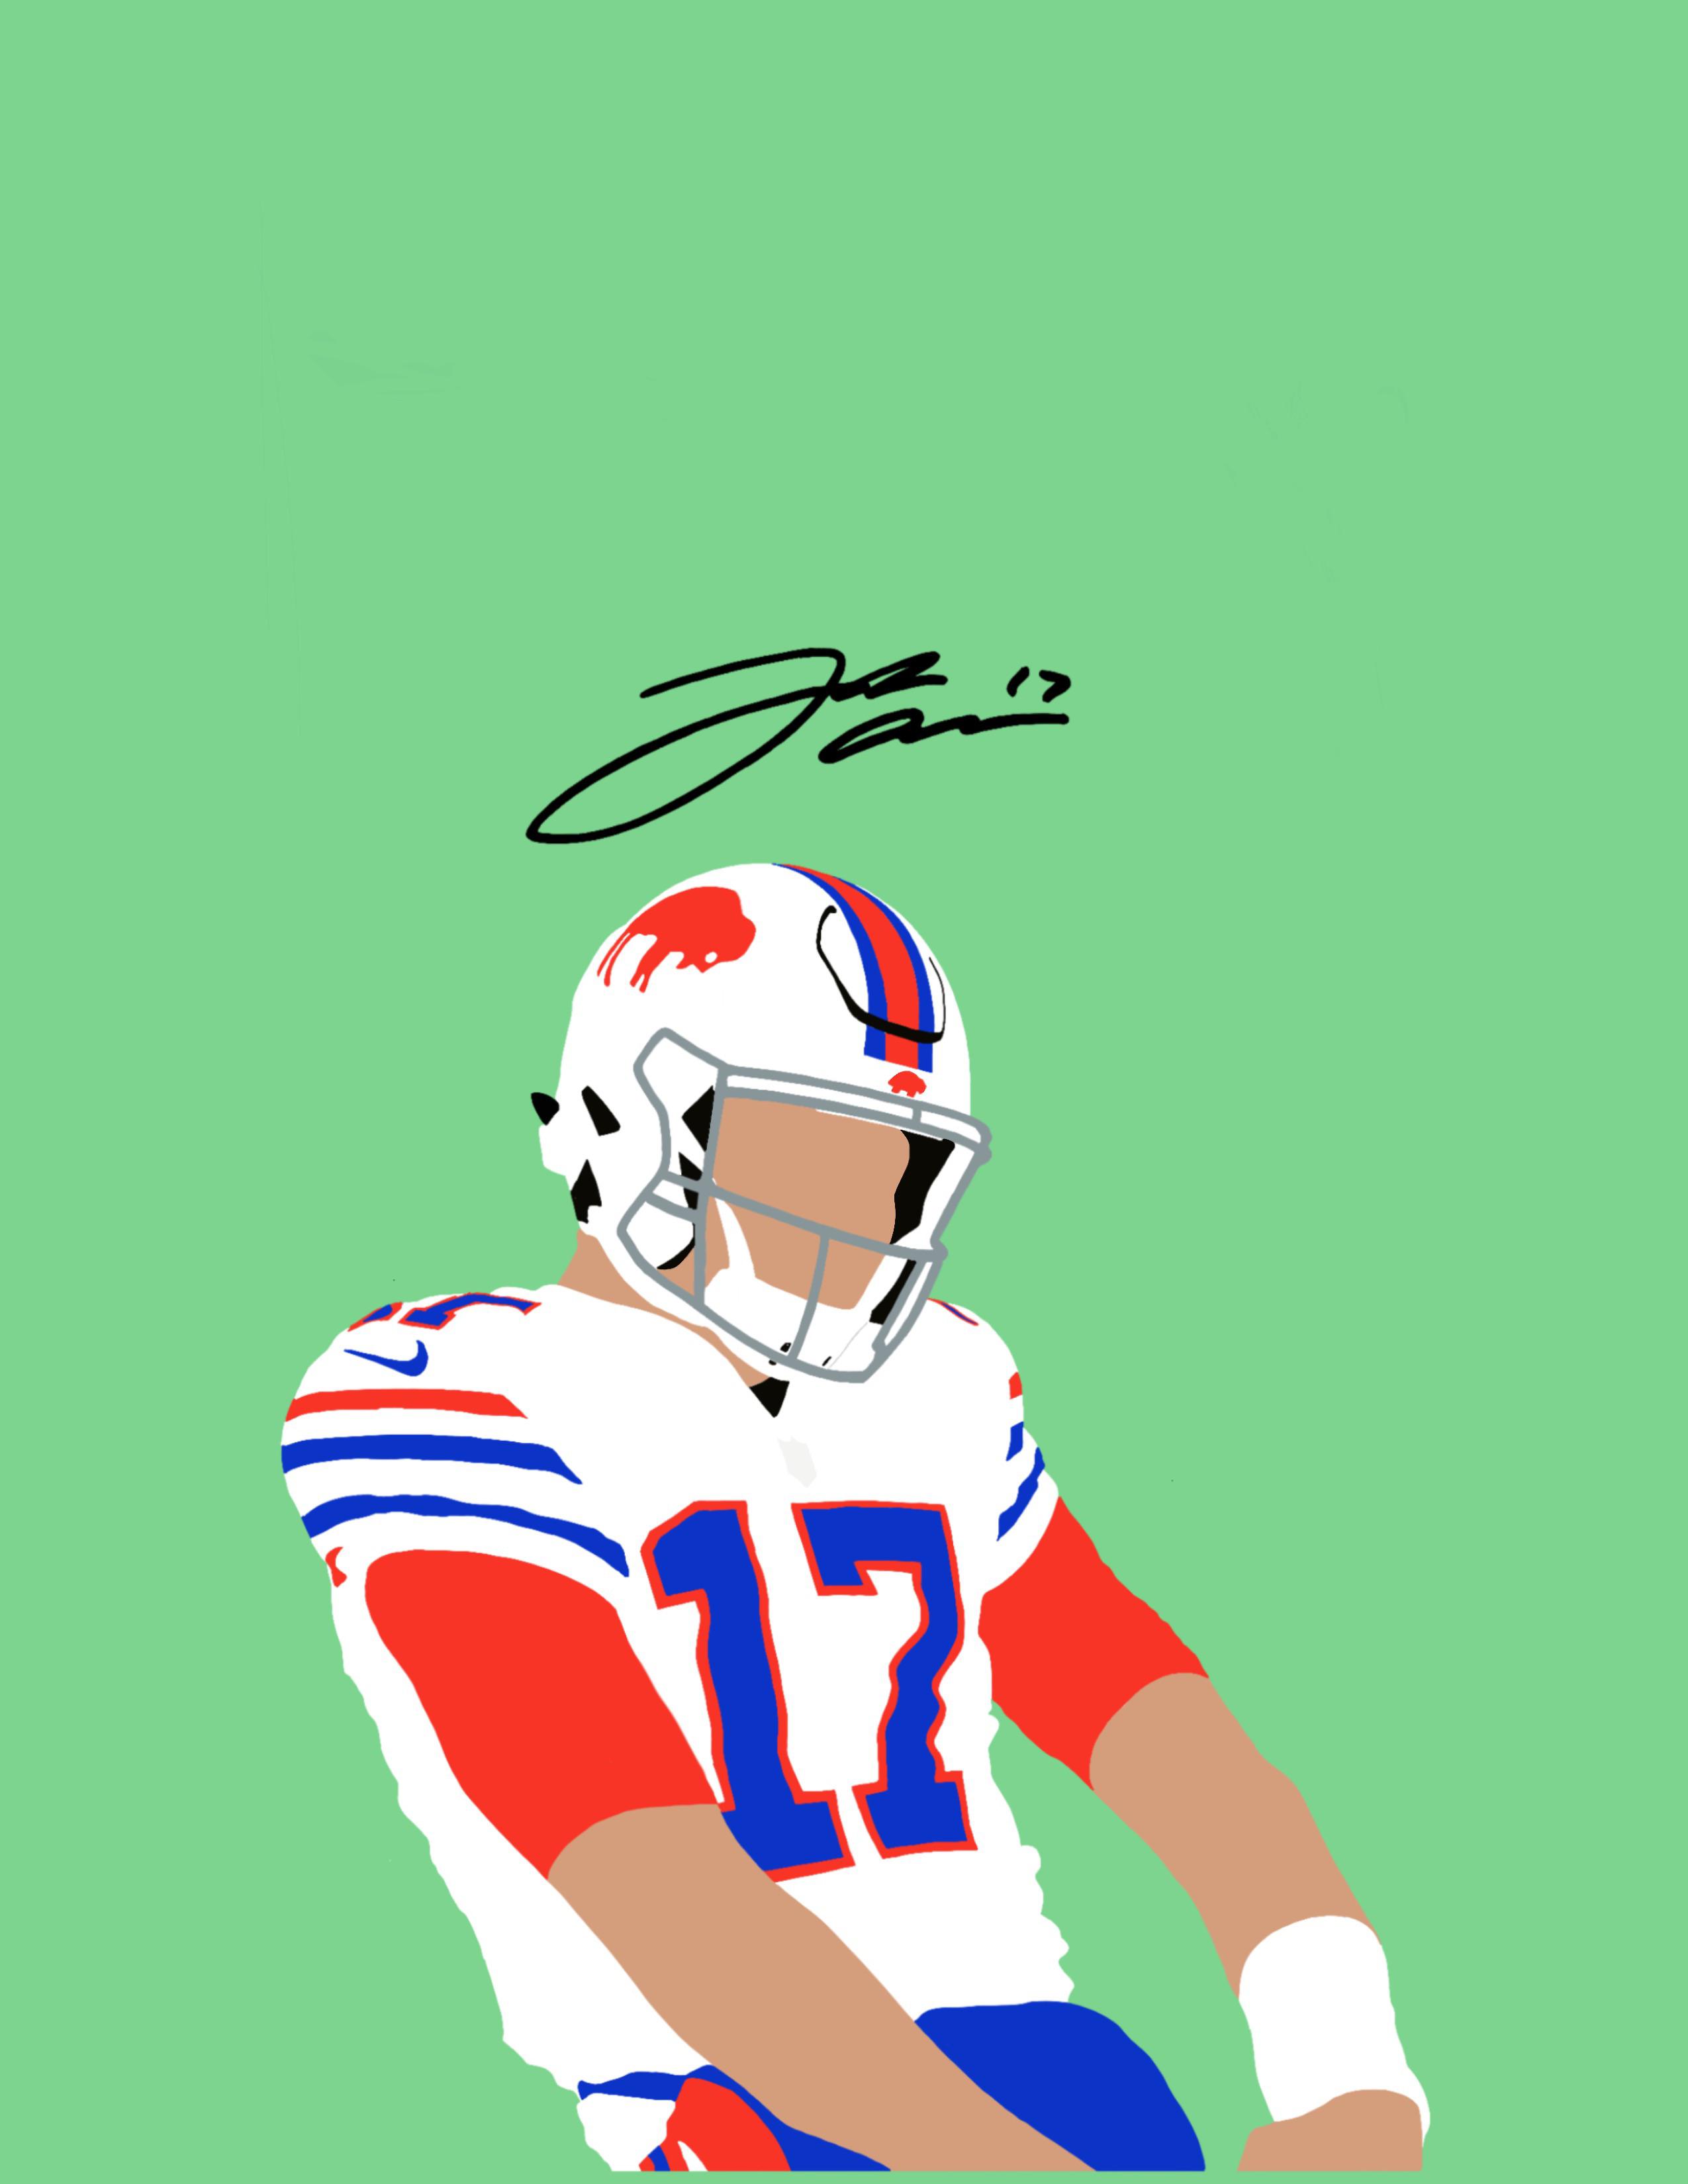 Here is a Josh Allen wallpaper I made of one of my favorite celebrations of his. I hope everyone loves it as much as I do. GO BILLS!!!